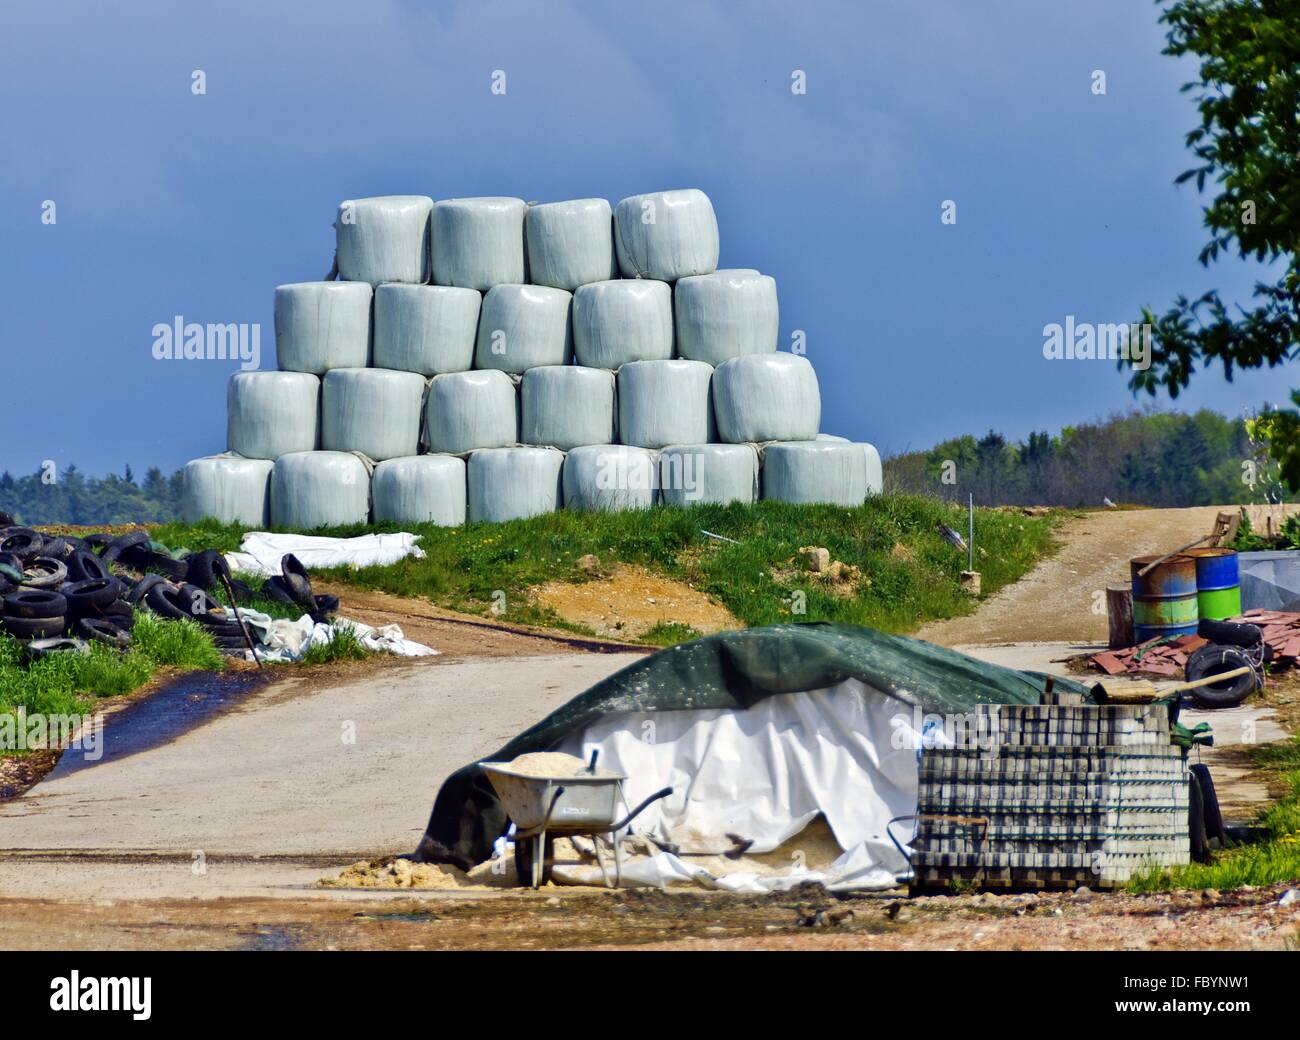 bales of silage wrapped in waterproof film Stock Photo